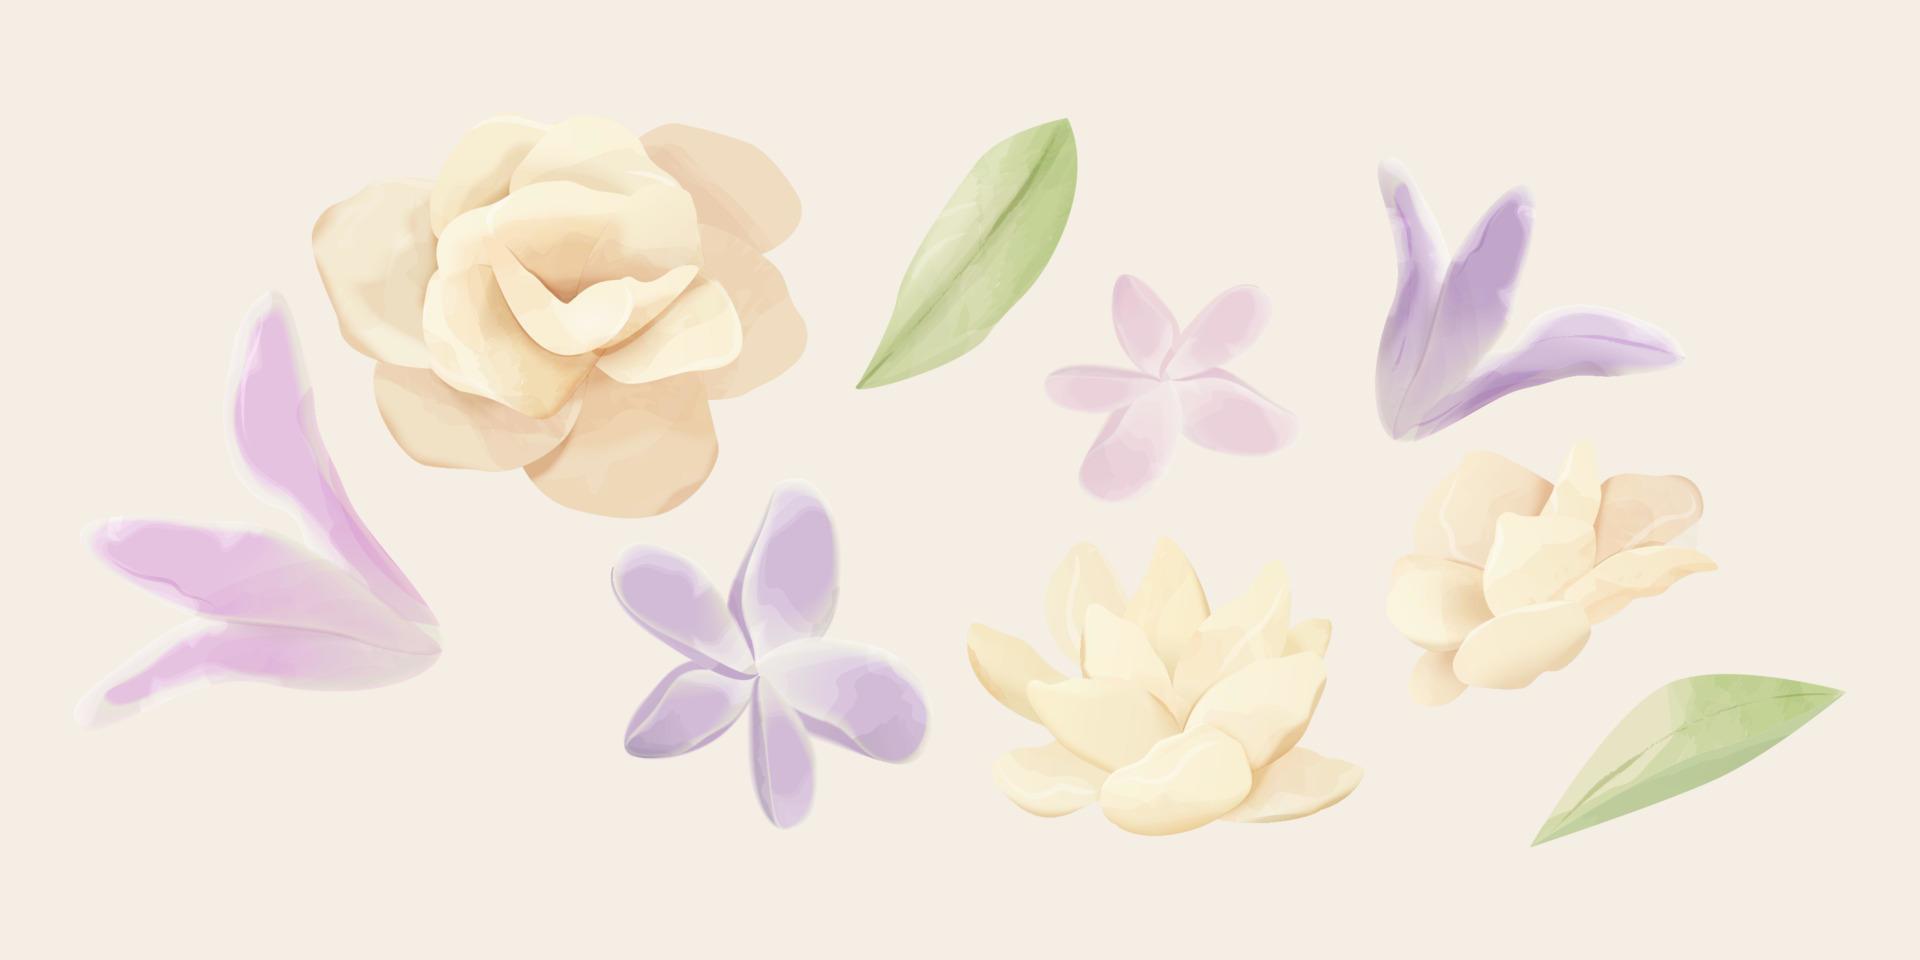 Hand drawn floral drawings of various flowers isolated on beige background. Suitable for wedding or spring decoration. vector